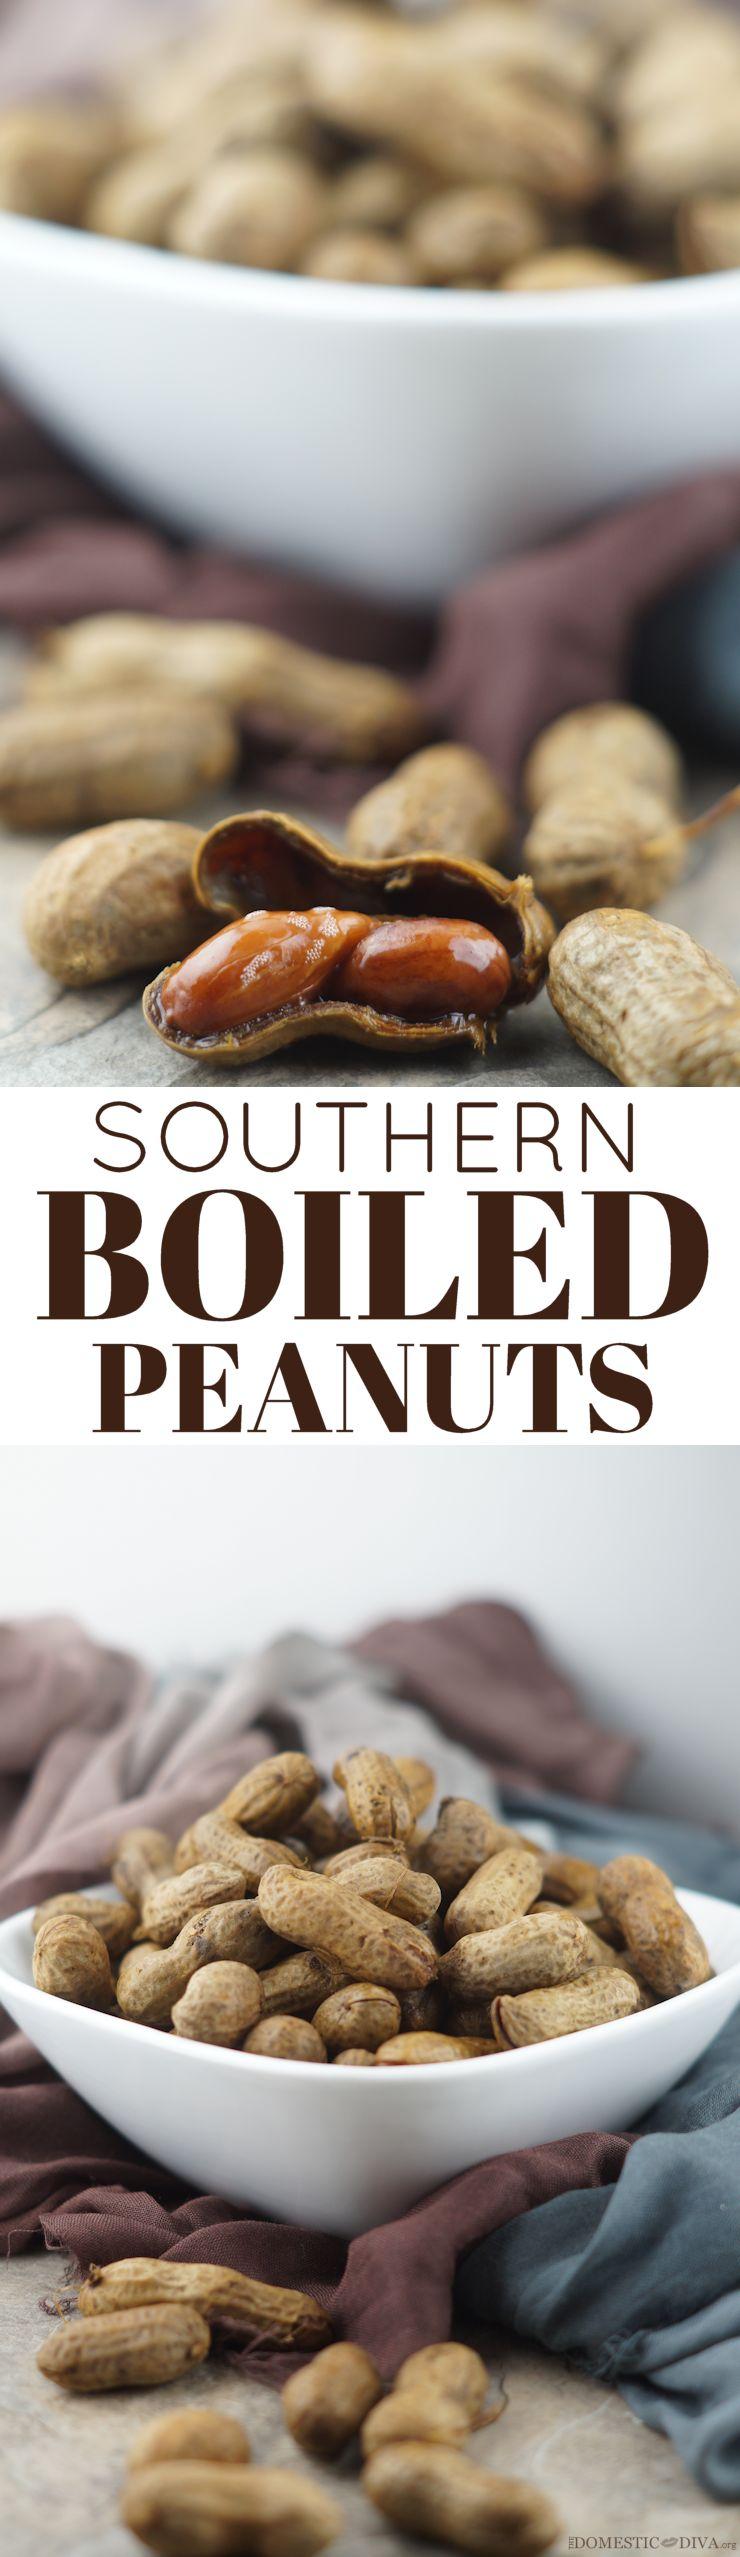 How to make Southern Boiled Peanuts